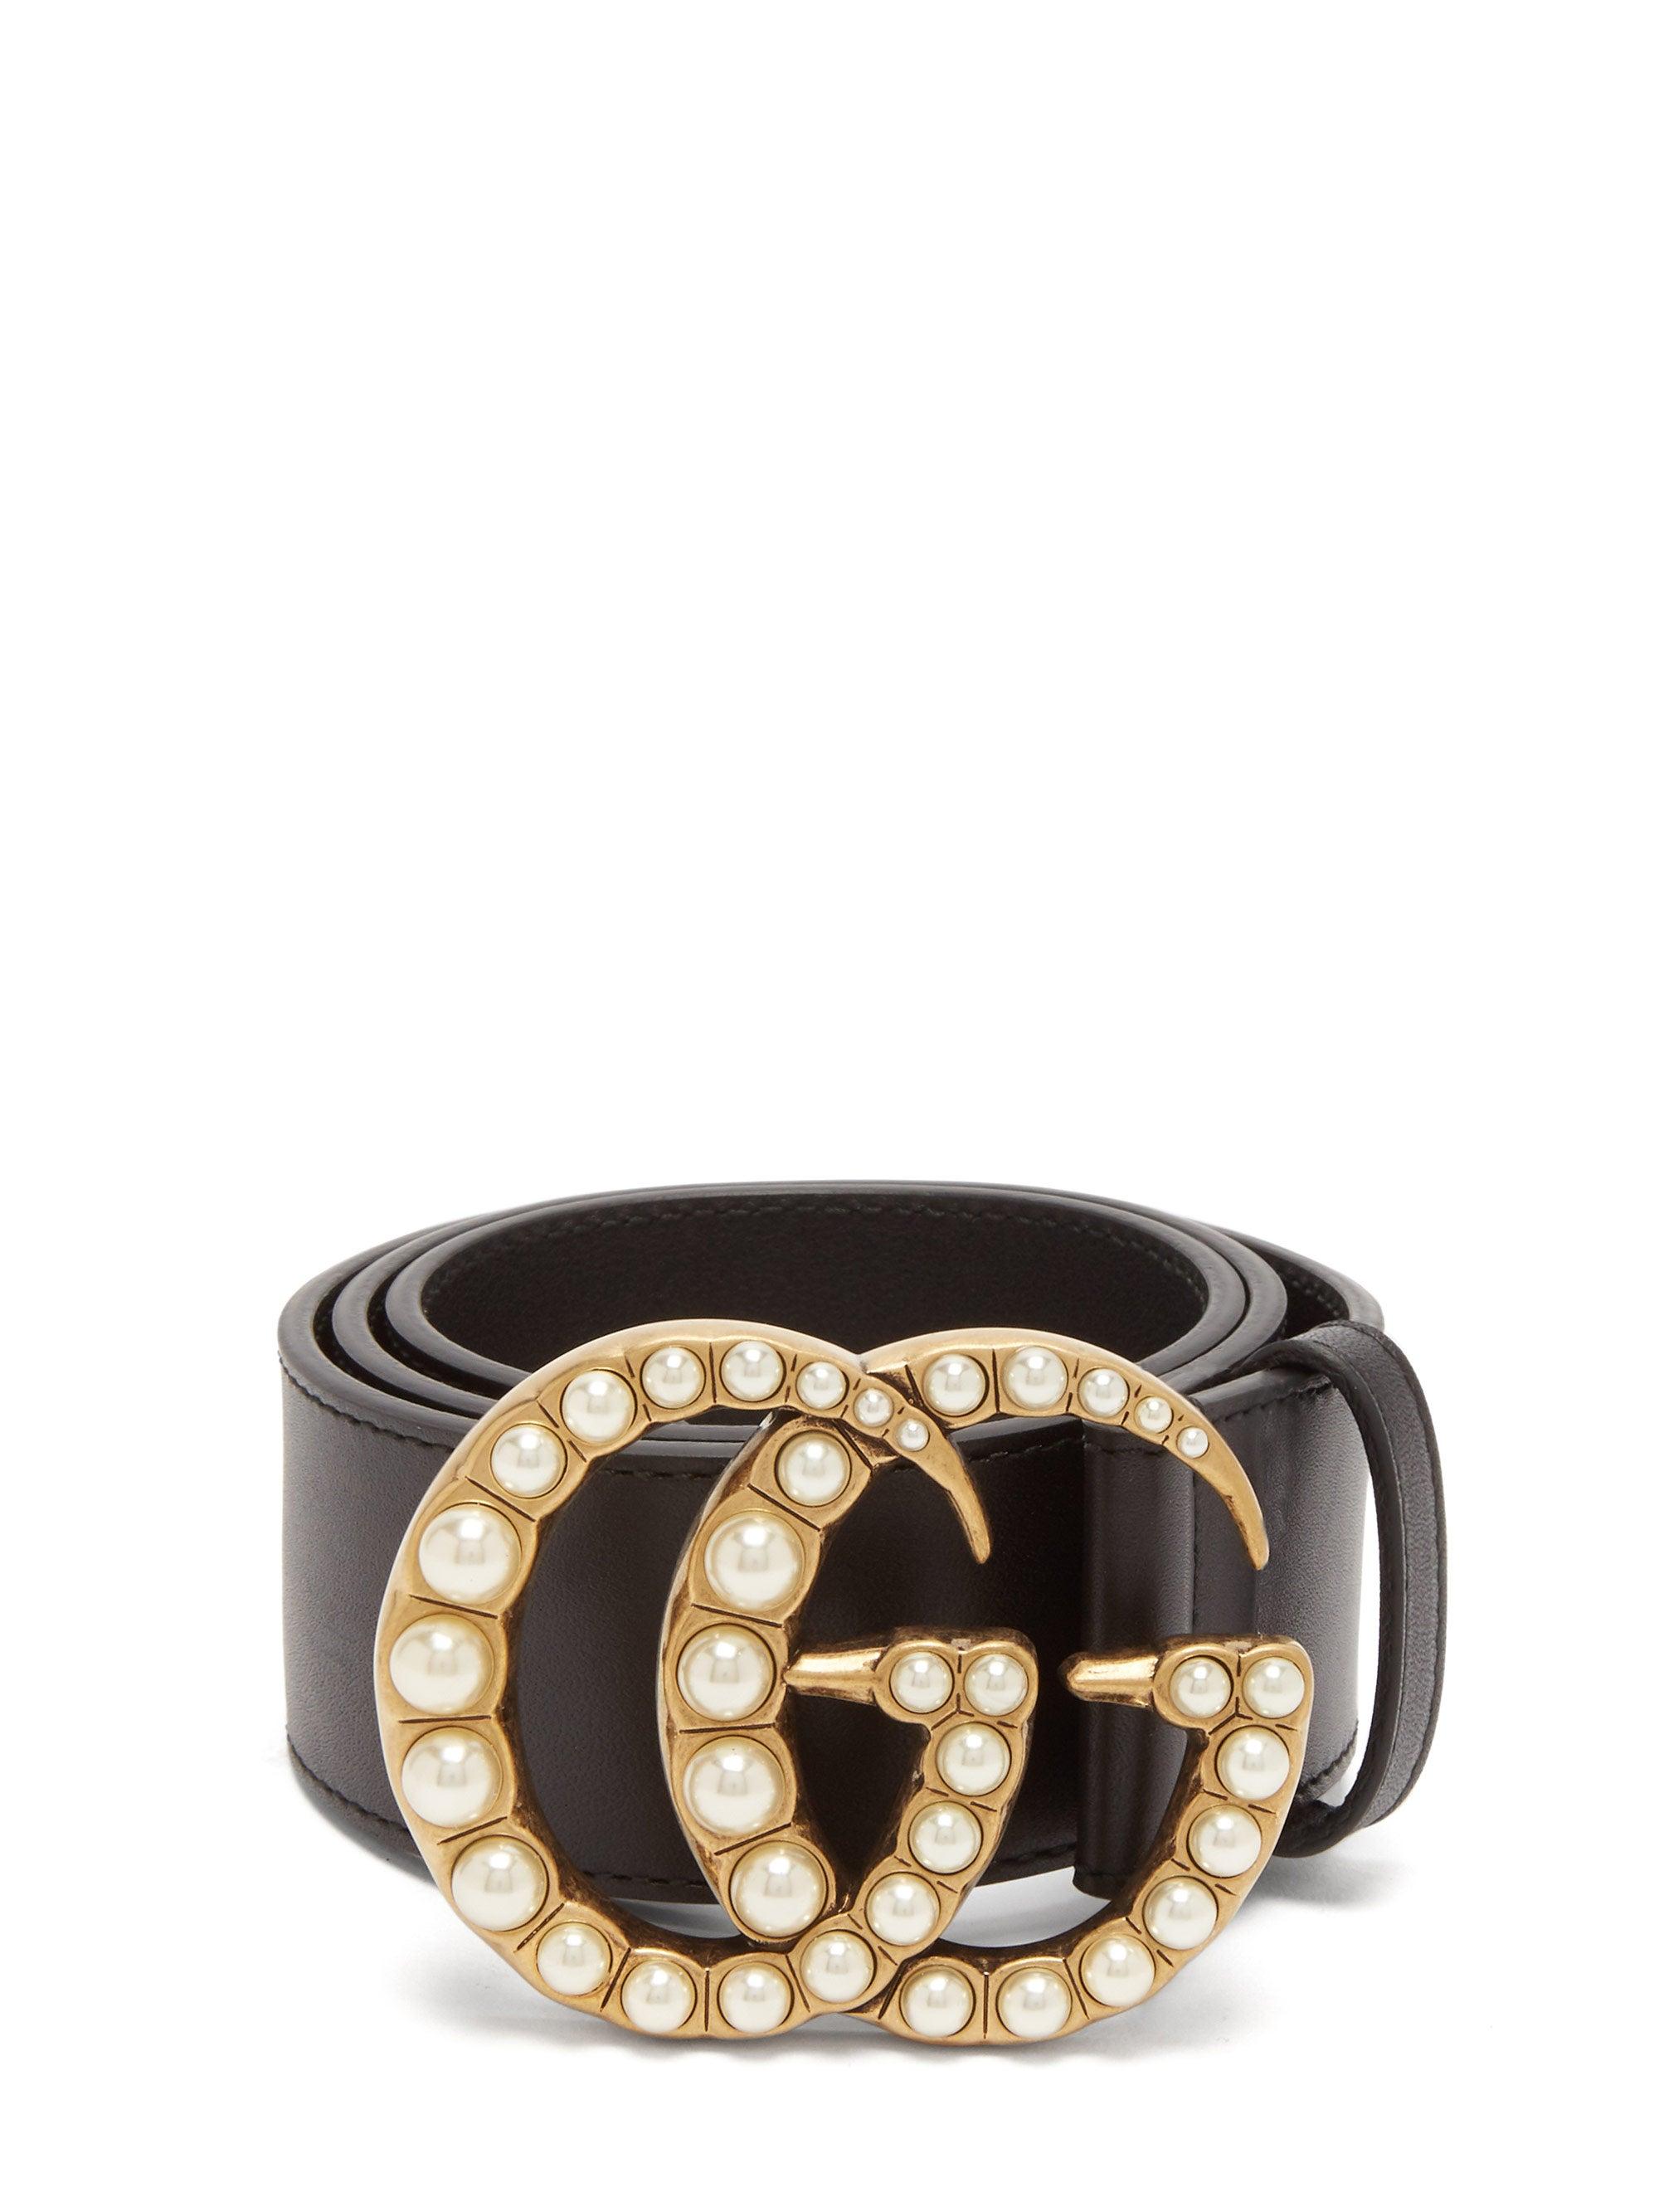 Gucci Leather Belt With Pearl Double G Buckle in Black | Lyst